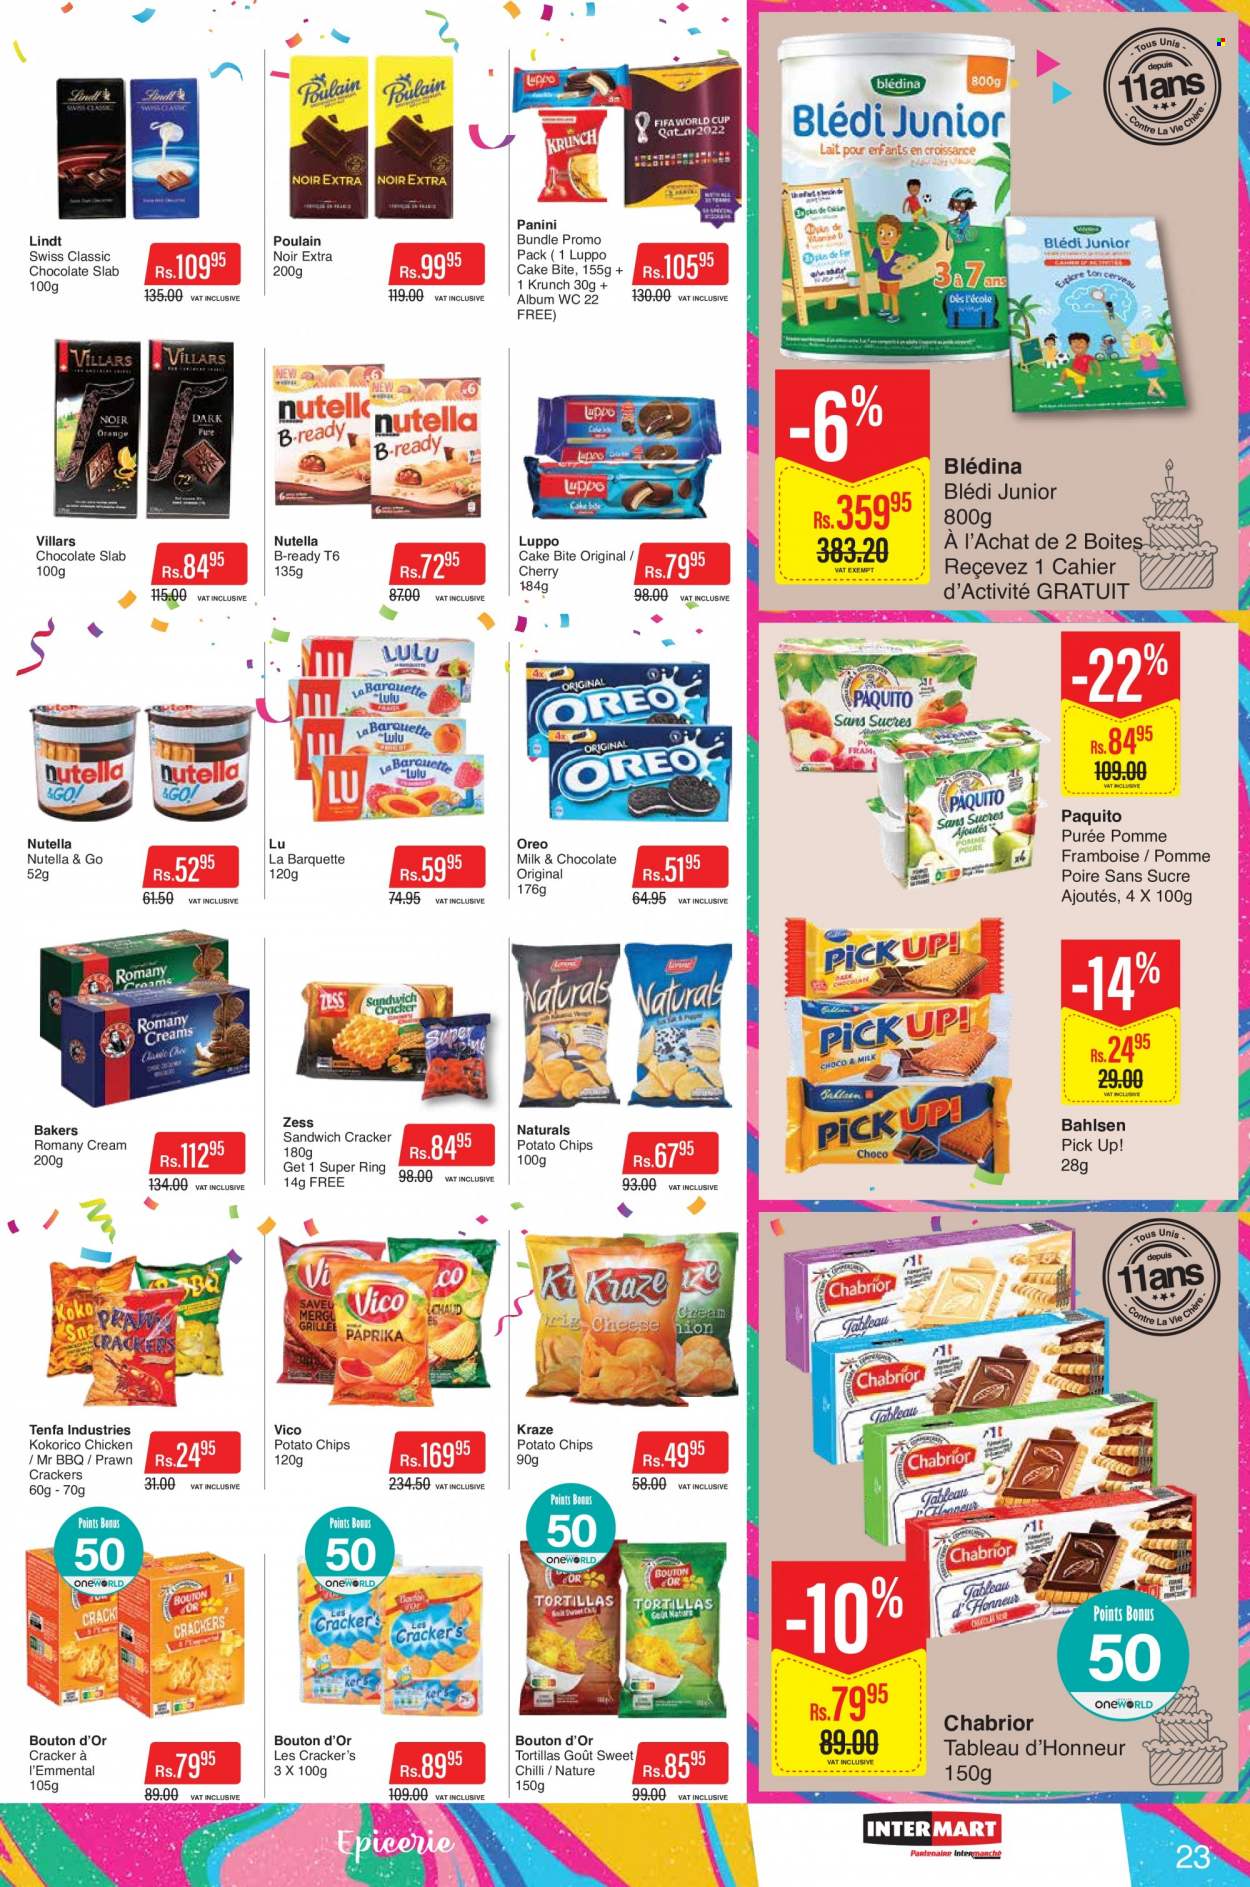 thumbnail - Intermart Catalogue - 23.09.2022 - 19.10.2022 - Sales products - tortillas, cake, panini, cherries, prawns, sandwich, milk, chocolate, crackers, potato chips, chips, Bakers, Nutella, Oreo, Lindt. Page 23.